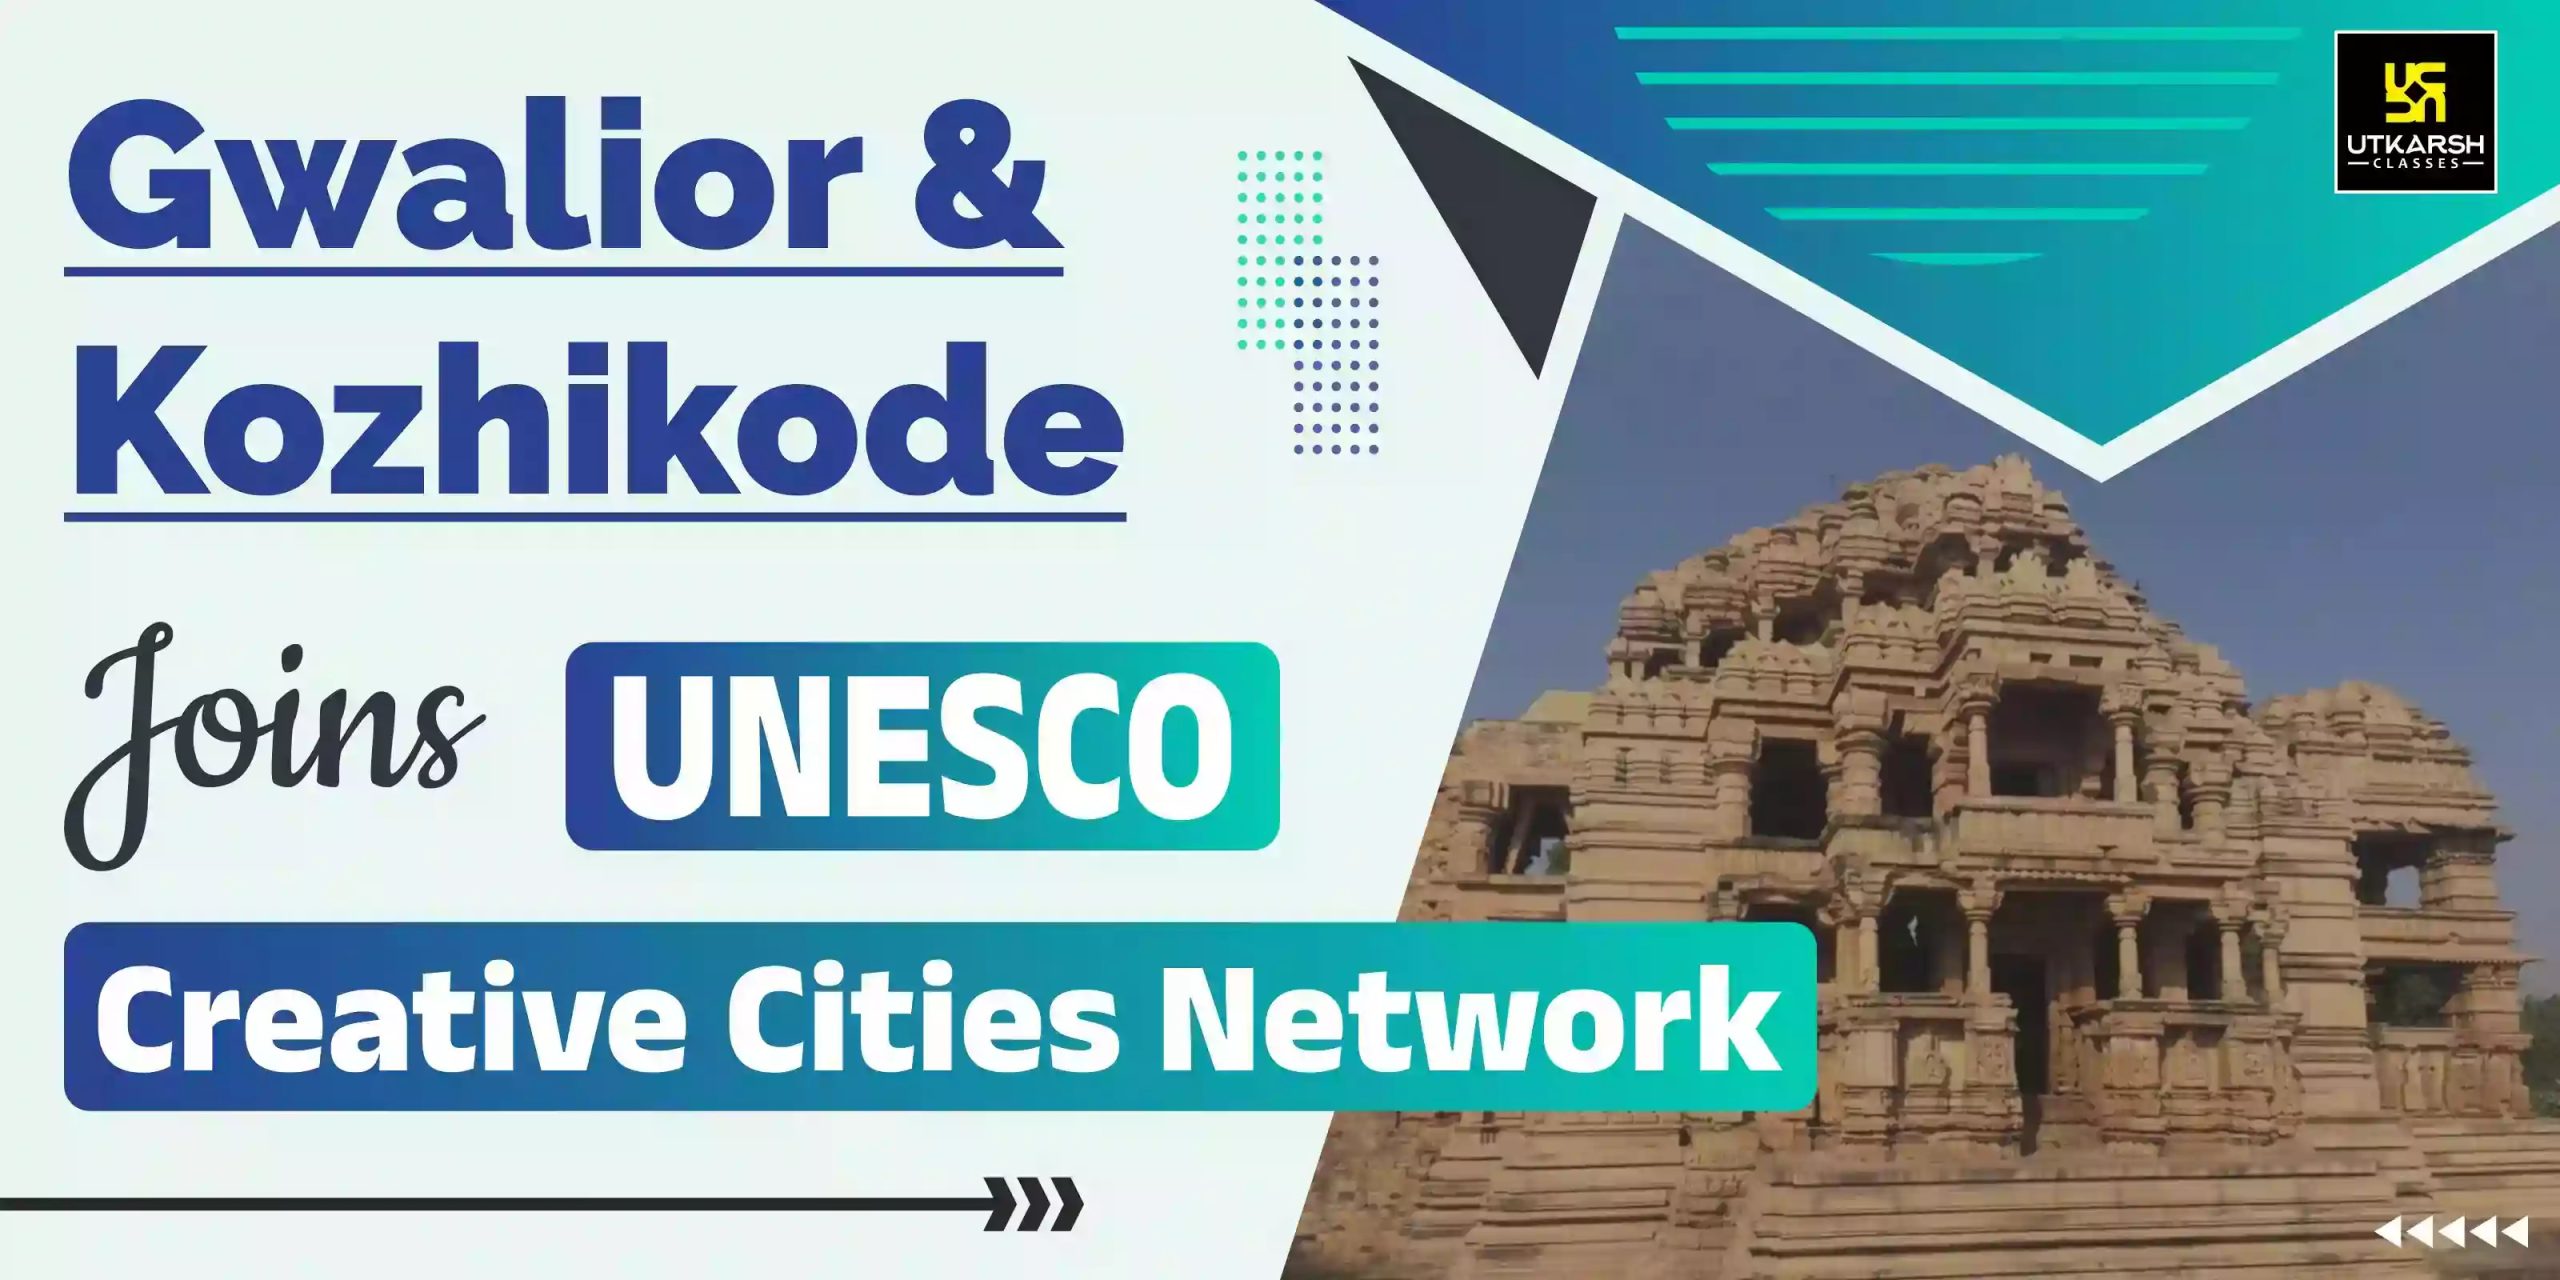 Gwalior and Kozhikode Earn Prestigious UNESCO Creative Cities Status: A Historic Triumph for India's Cultural Heritage - Adela Journal - News from around the World